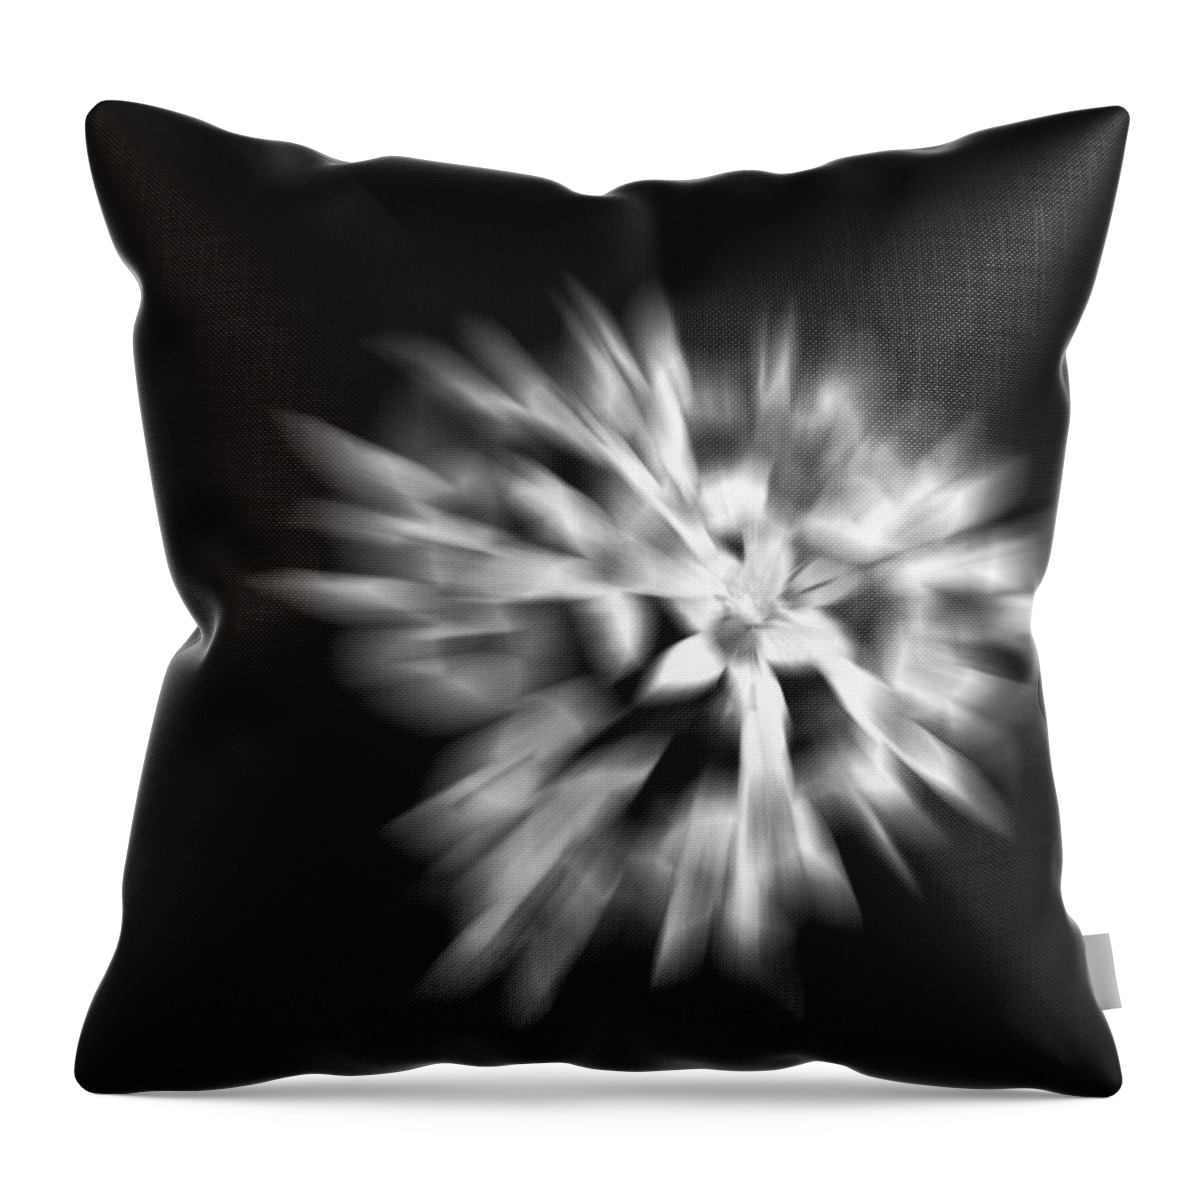 Flower Throw Pillow featuring the photograph Remember Me by Ann Powell